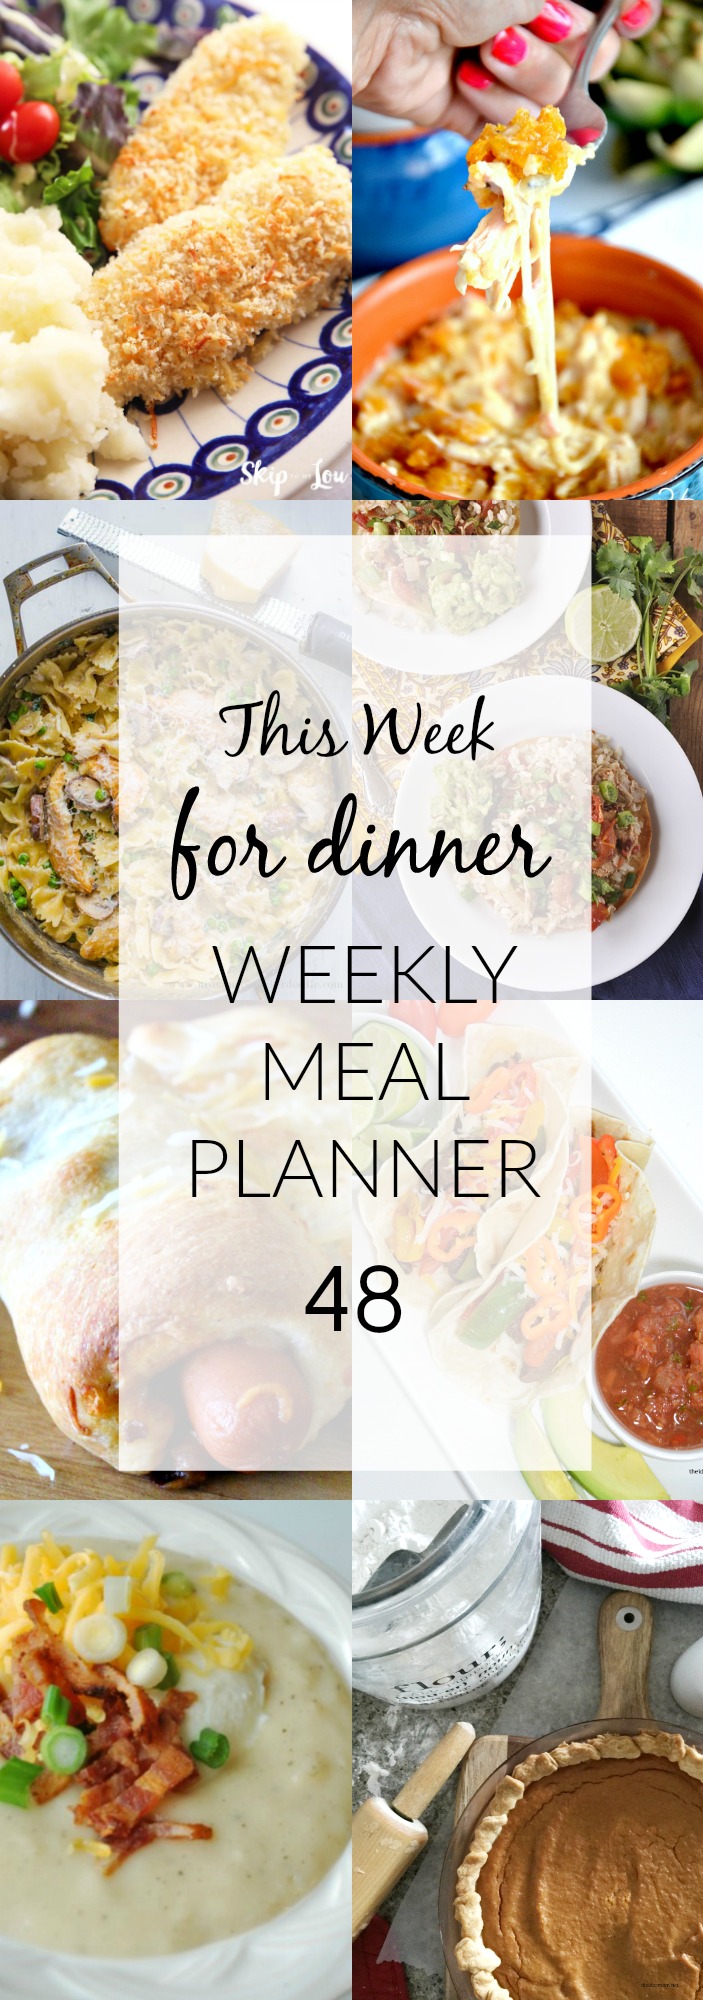 Are we ready for our Weekly Meal Plan number 48? This week we have Chicken & Peas Creamy Pasta, Chicken Cordon Bleu Casserole, Slow Cooker Chicken Tinga, Stake Fajitas, Chili Cheese Dogs, Baked Potato Soup and for dessert Crispy Baked Garlic Chicken